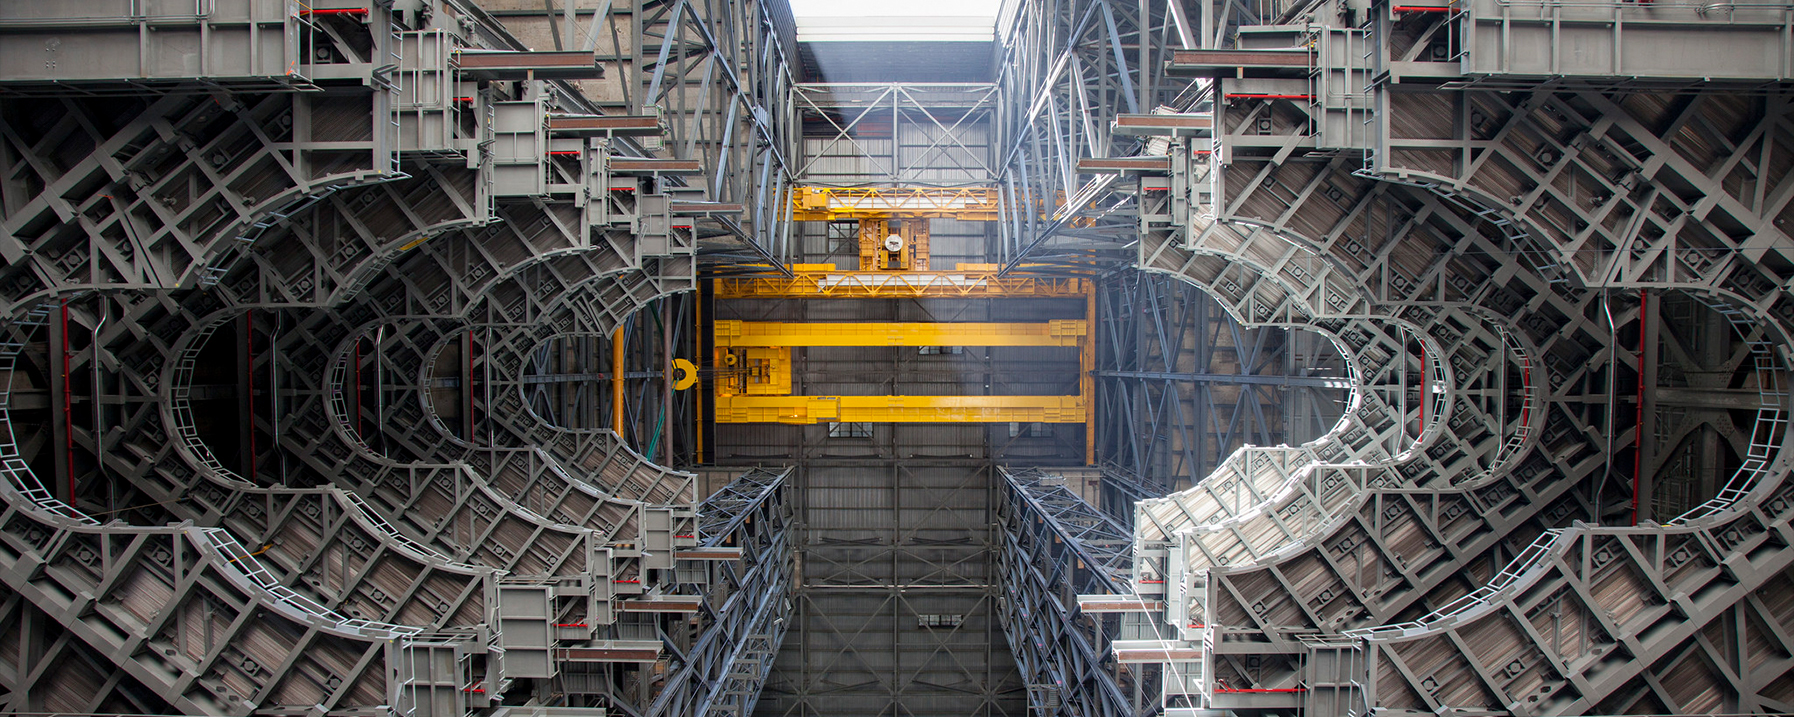 Work Platforms in the Vehicle Assembly Building